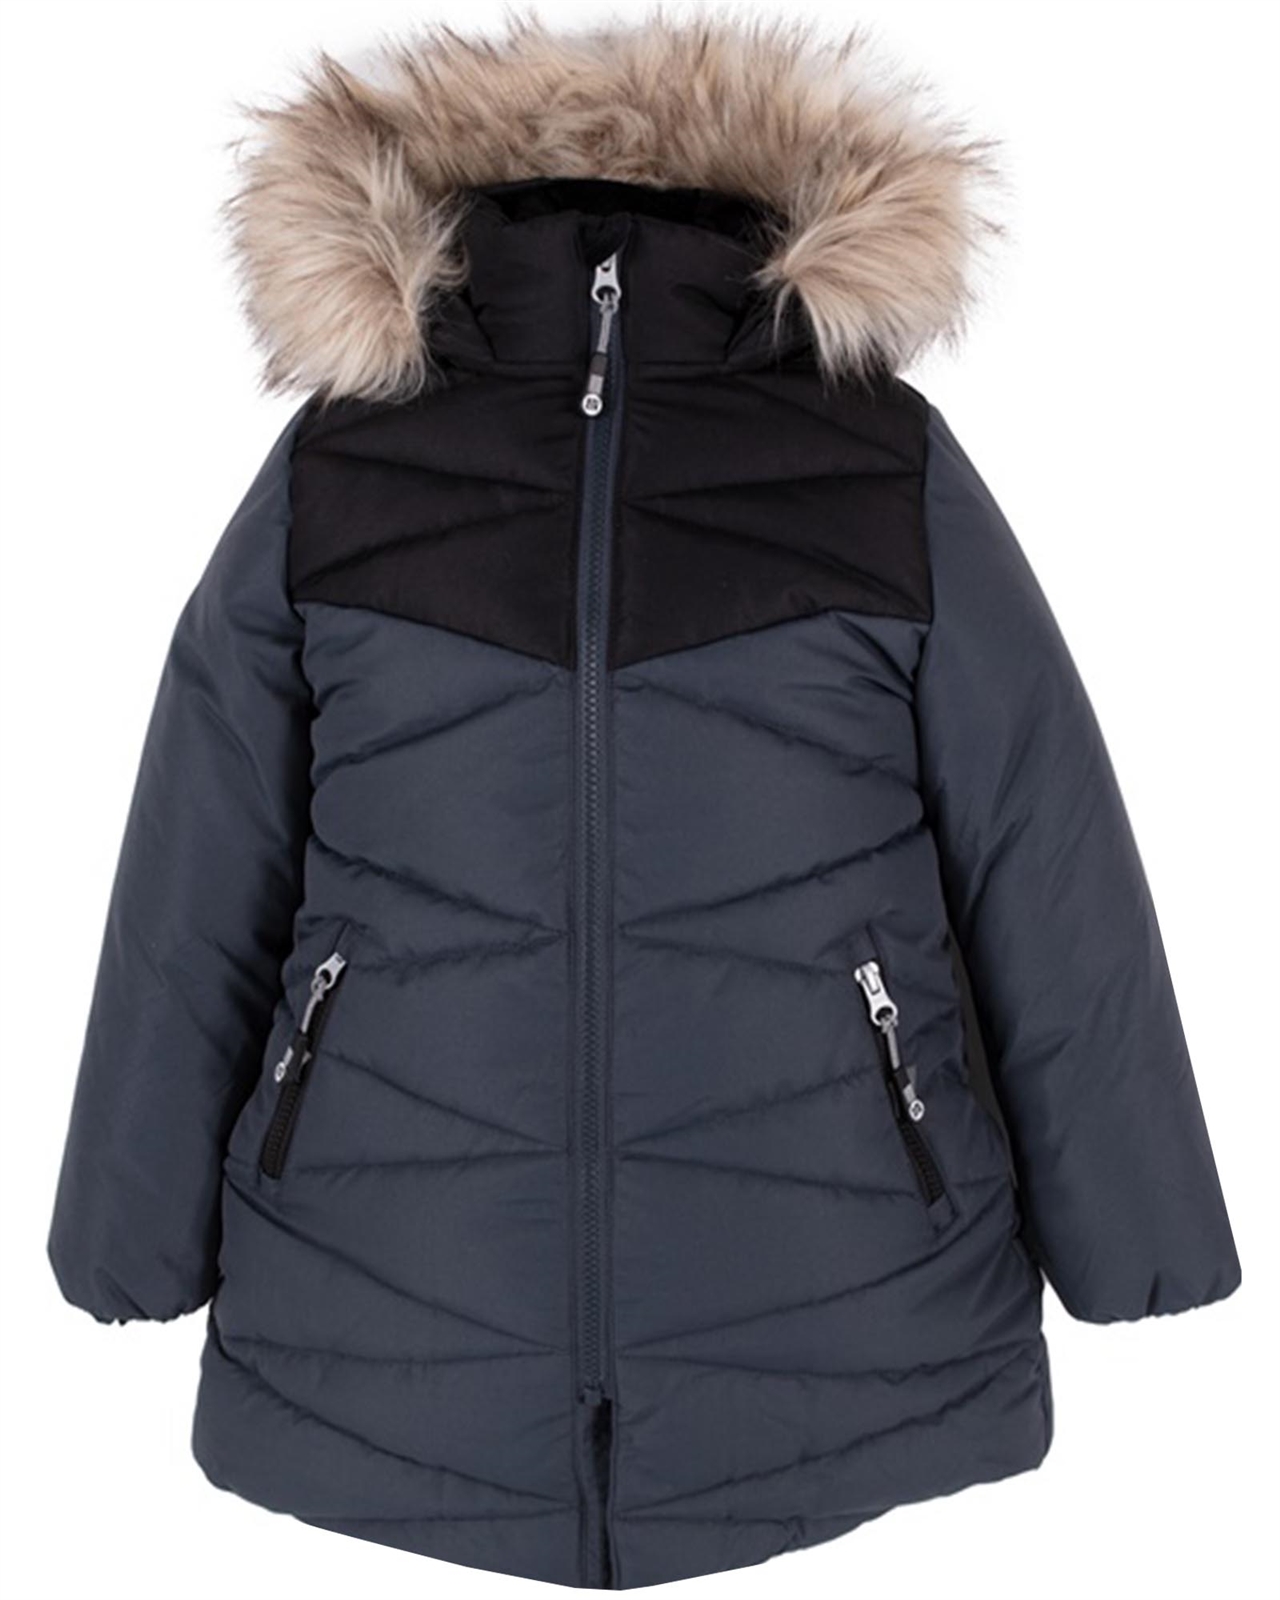 Nano Girls Quilted Puffer Coat in Charcoal